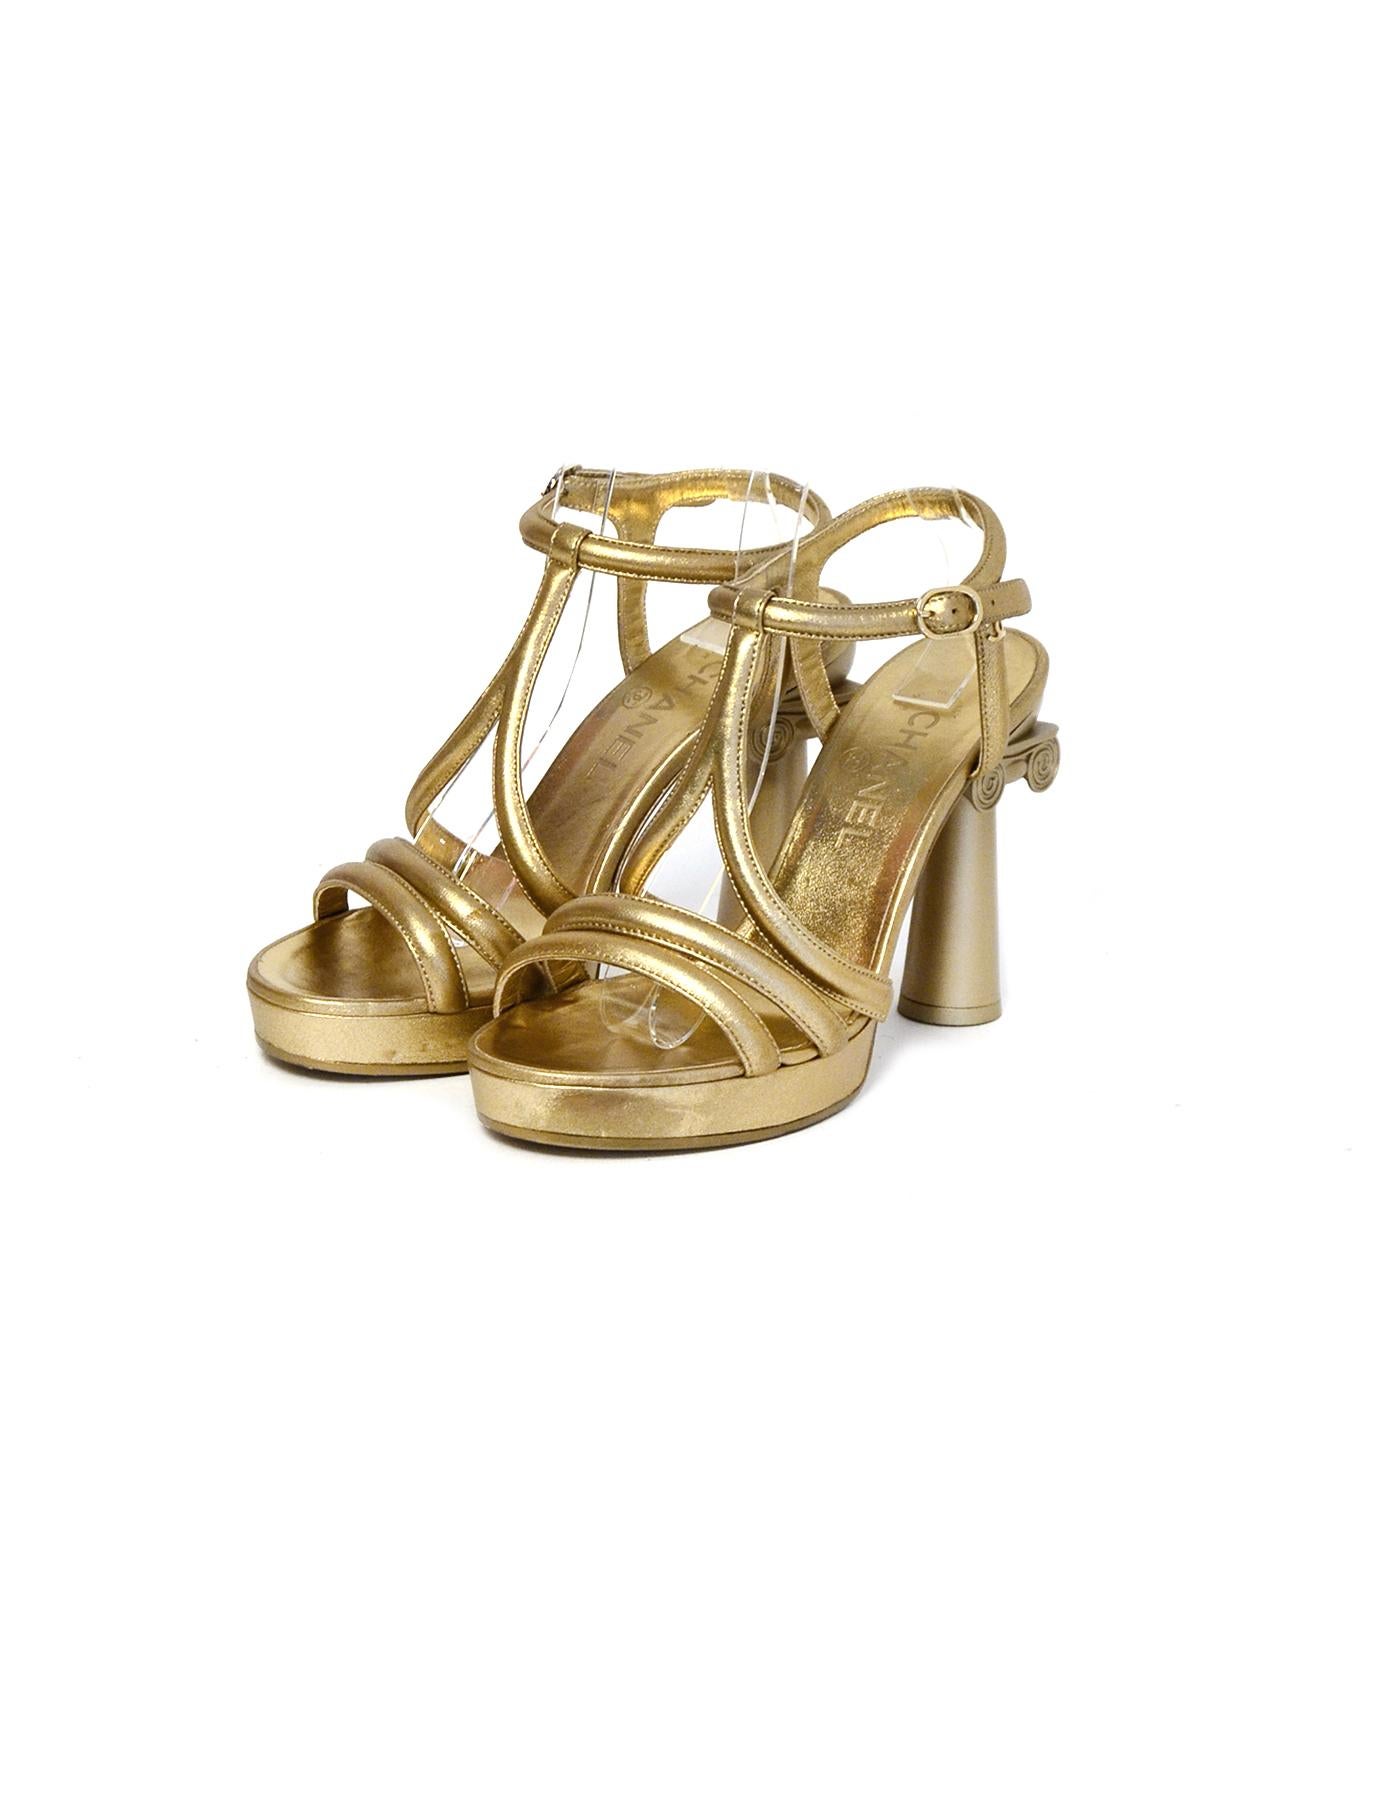 Chanel Gold Parthenon Grecian Column Platform Sandals sz 38

Made In: Italy
Year of Production: 2018
Color: Gold
Hardware: Goldtone hardware
Materials: Leather
Closure/Opening: Side buckle closure
Overall Condition: Very good pre-owned condition,